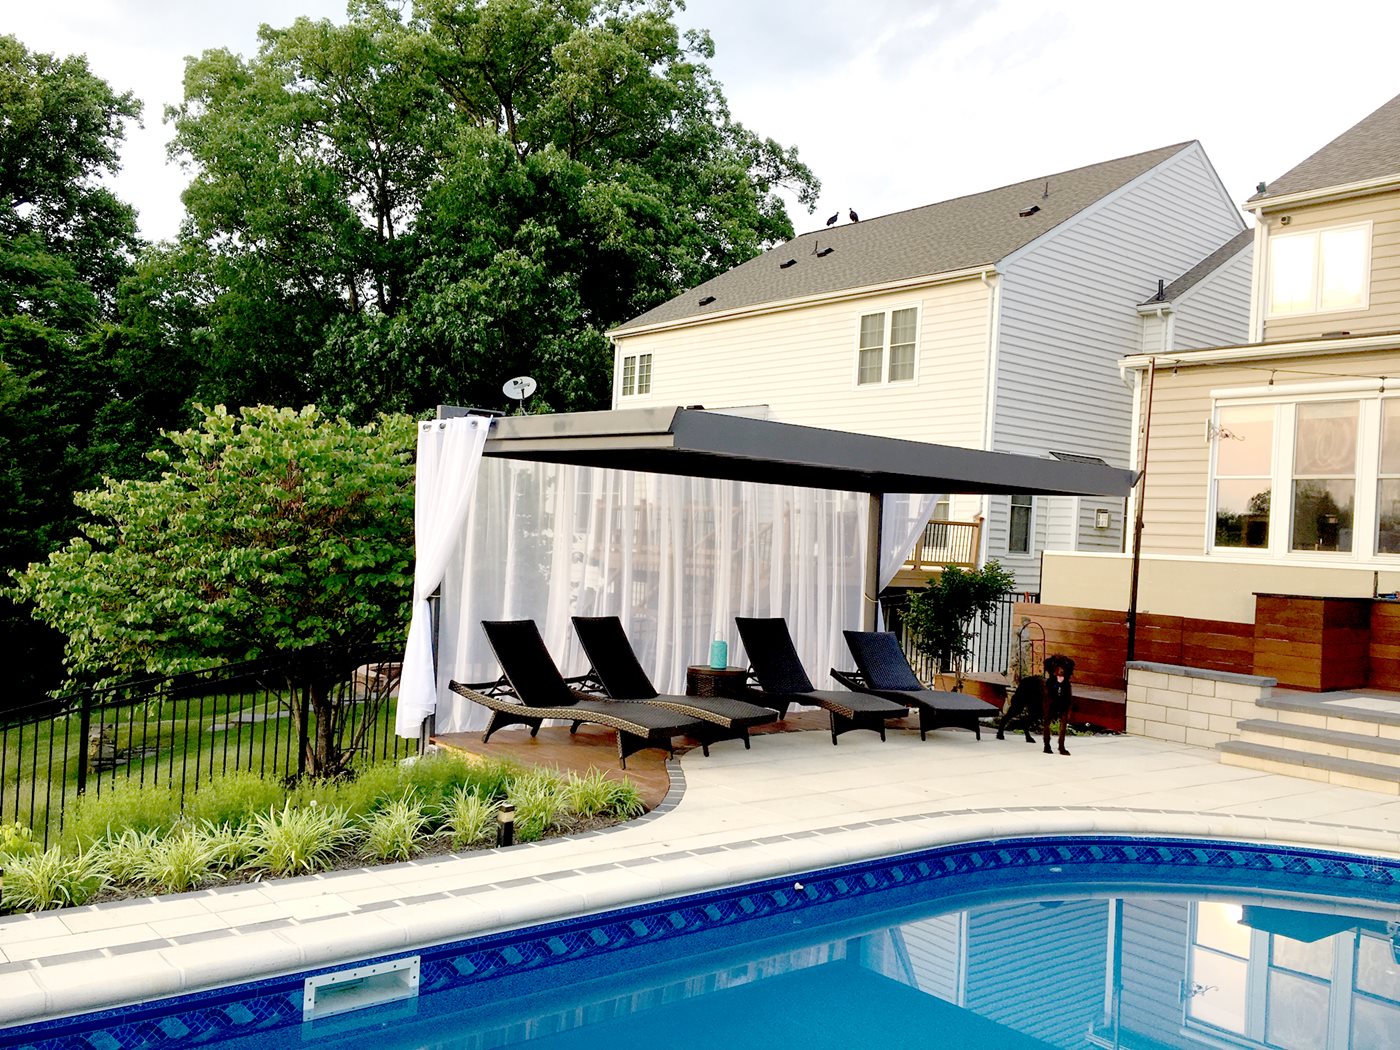 Poolside-Custom-Alba-at-Maryland-Residence-by-The-Deck-Awning-Co-(3).jpg